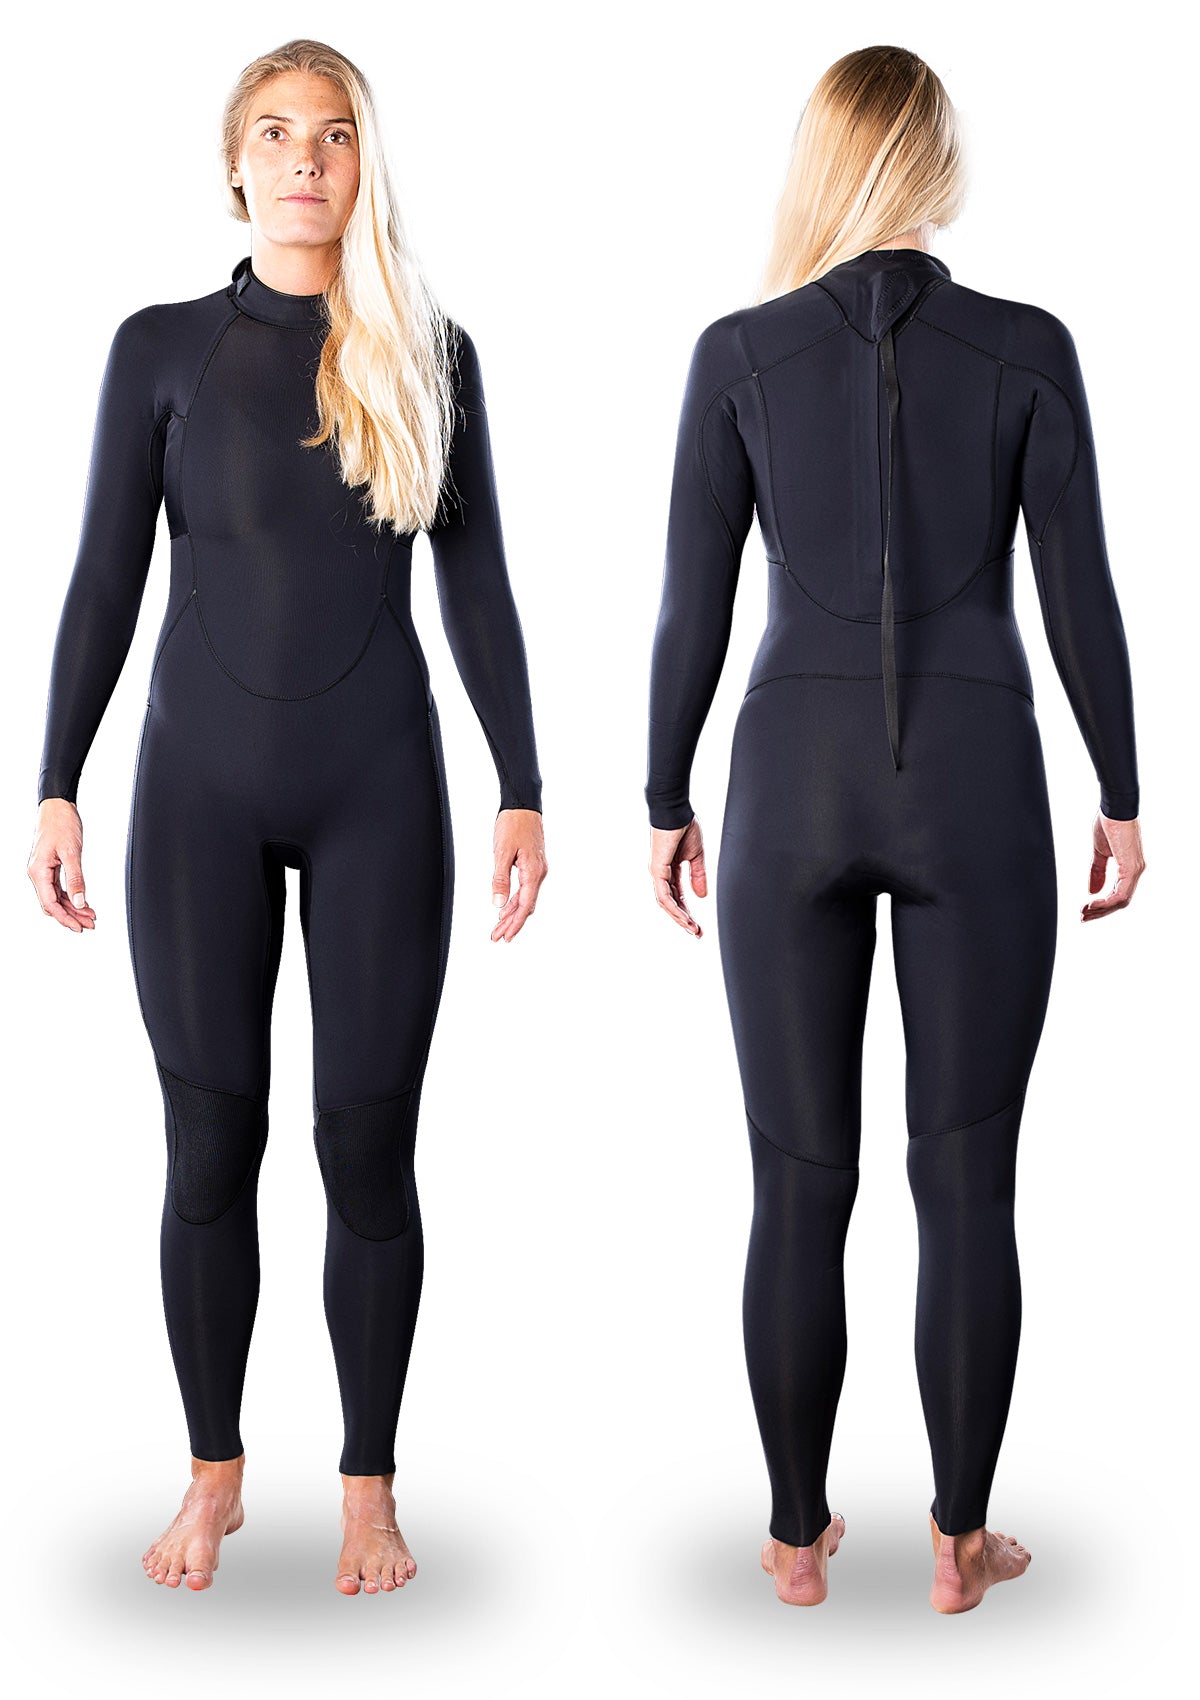 needessentials womens 3/2 back zip thermal winter wetsuit surfing black non branded